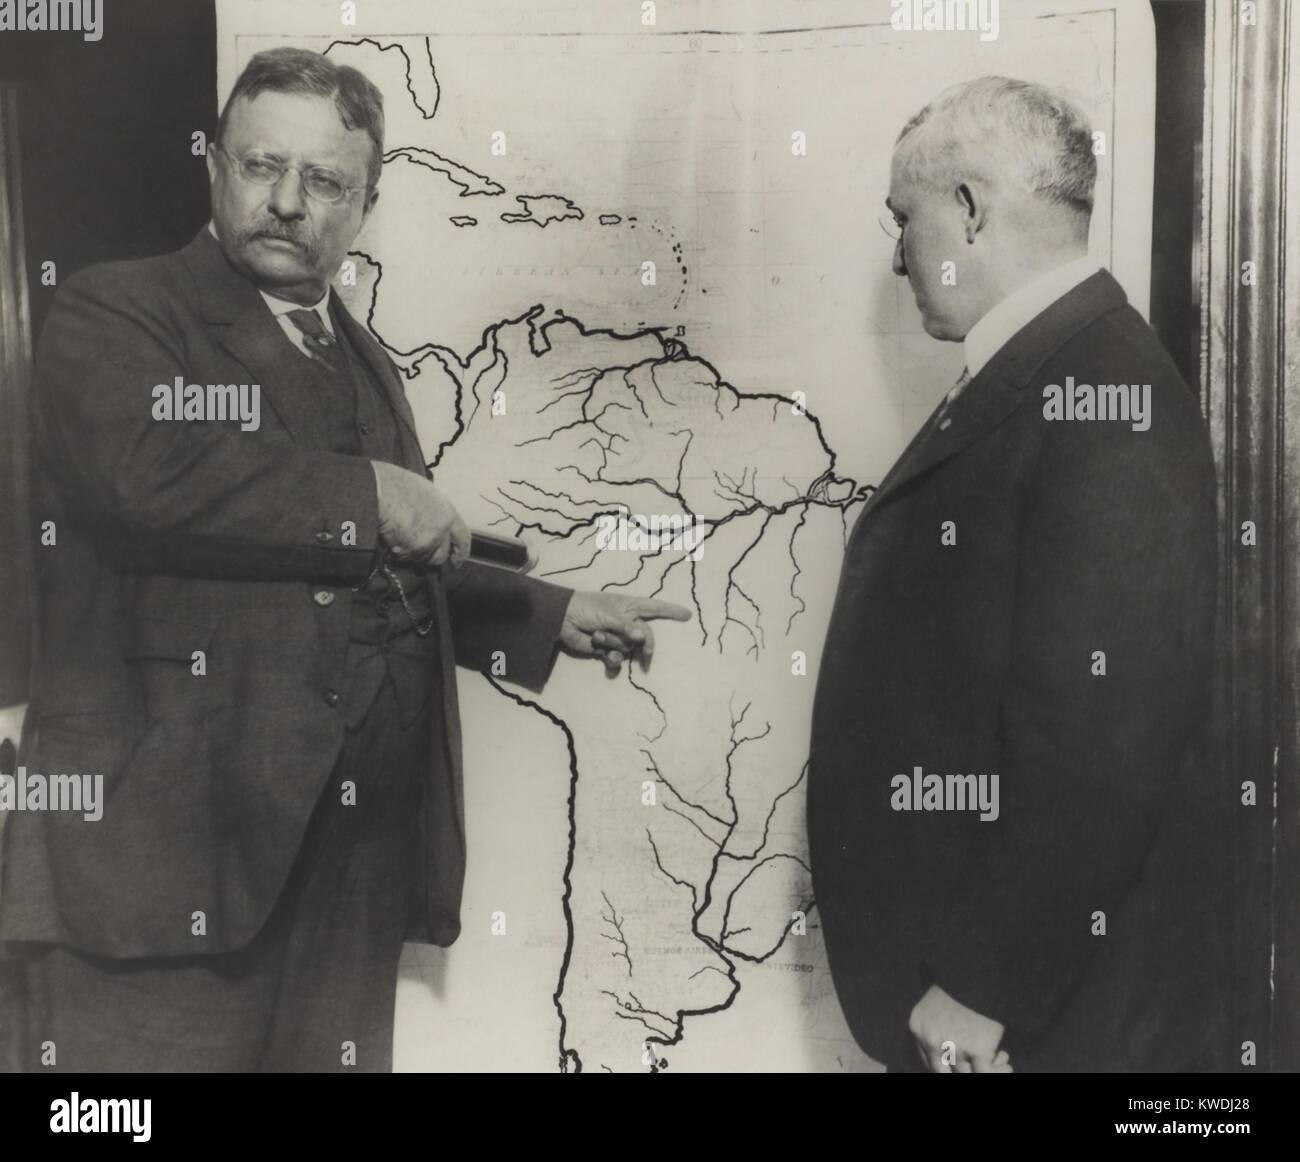 Theodore Roosevelt pointing at the area explored during the Roosevelt-Rondon Scientific Expedition. They explored the 1000-mile long River of Doubt, which was renamed River Roosevelt (BSLOC 2017 8 67) Stock Photo